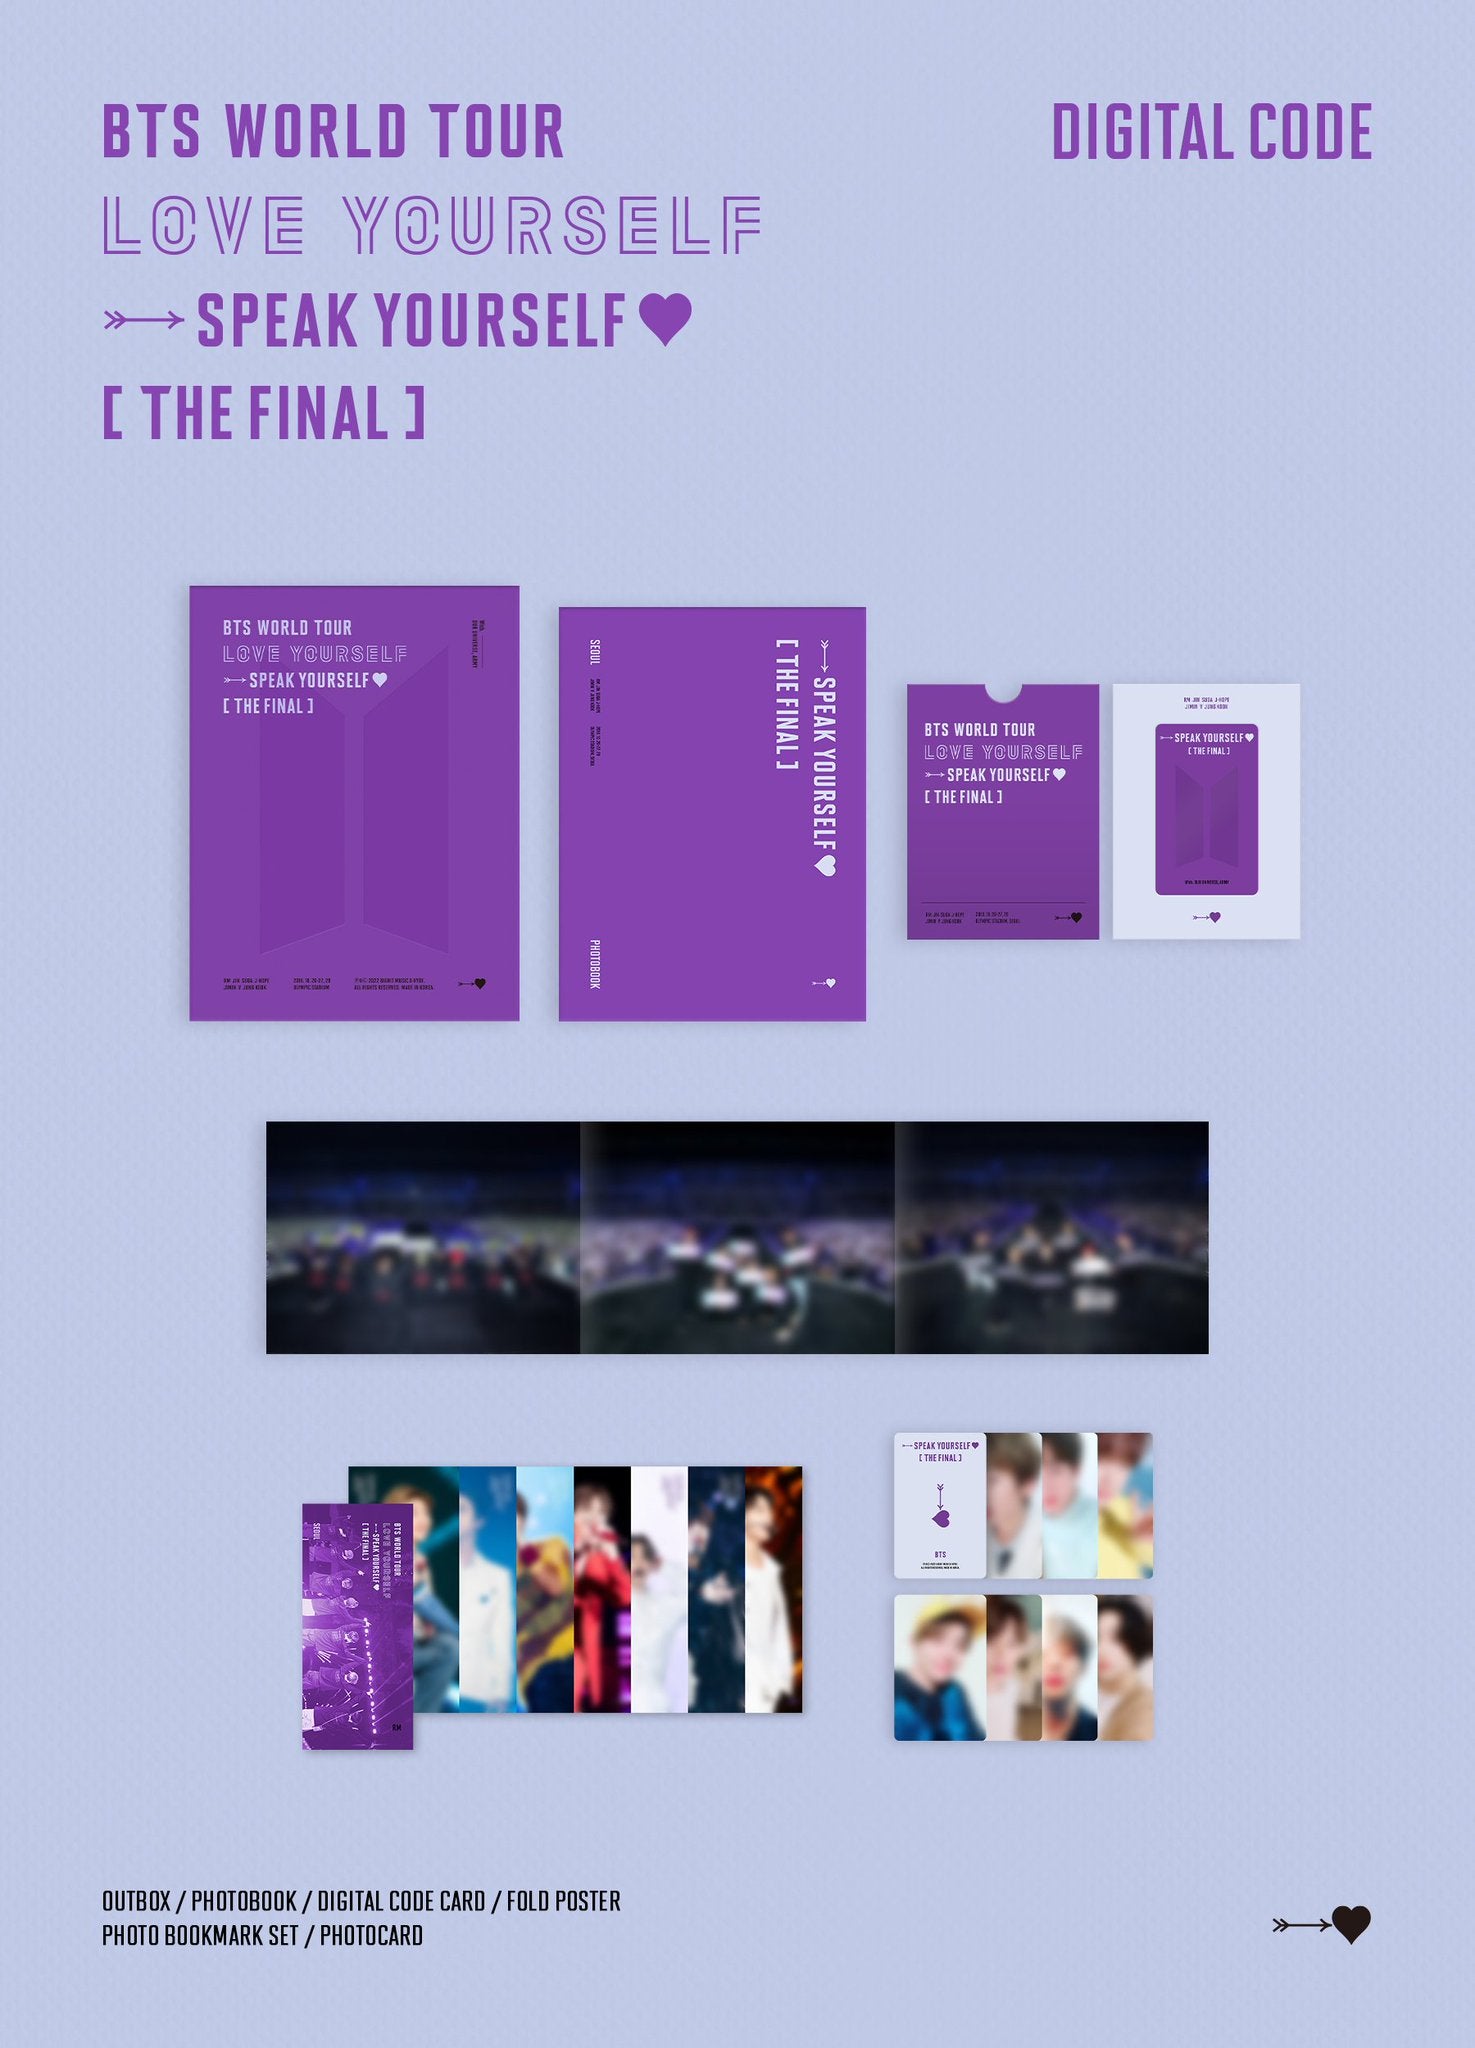 bts SPEAK YOURSELF THE FINAL sys armyブース | www.gamutgallerympls.com